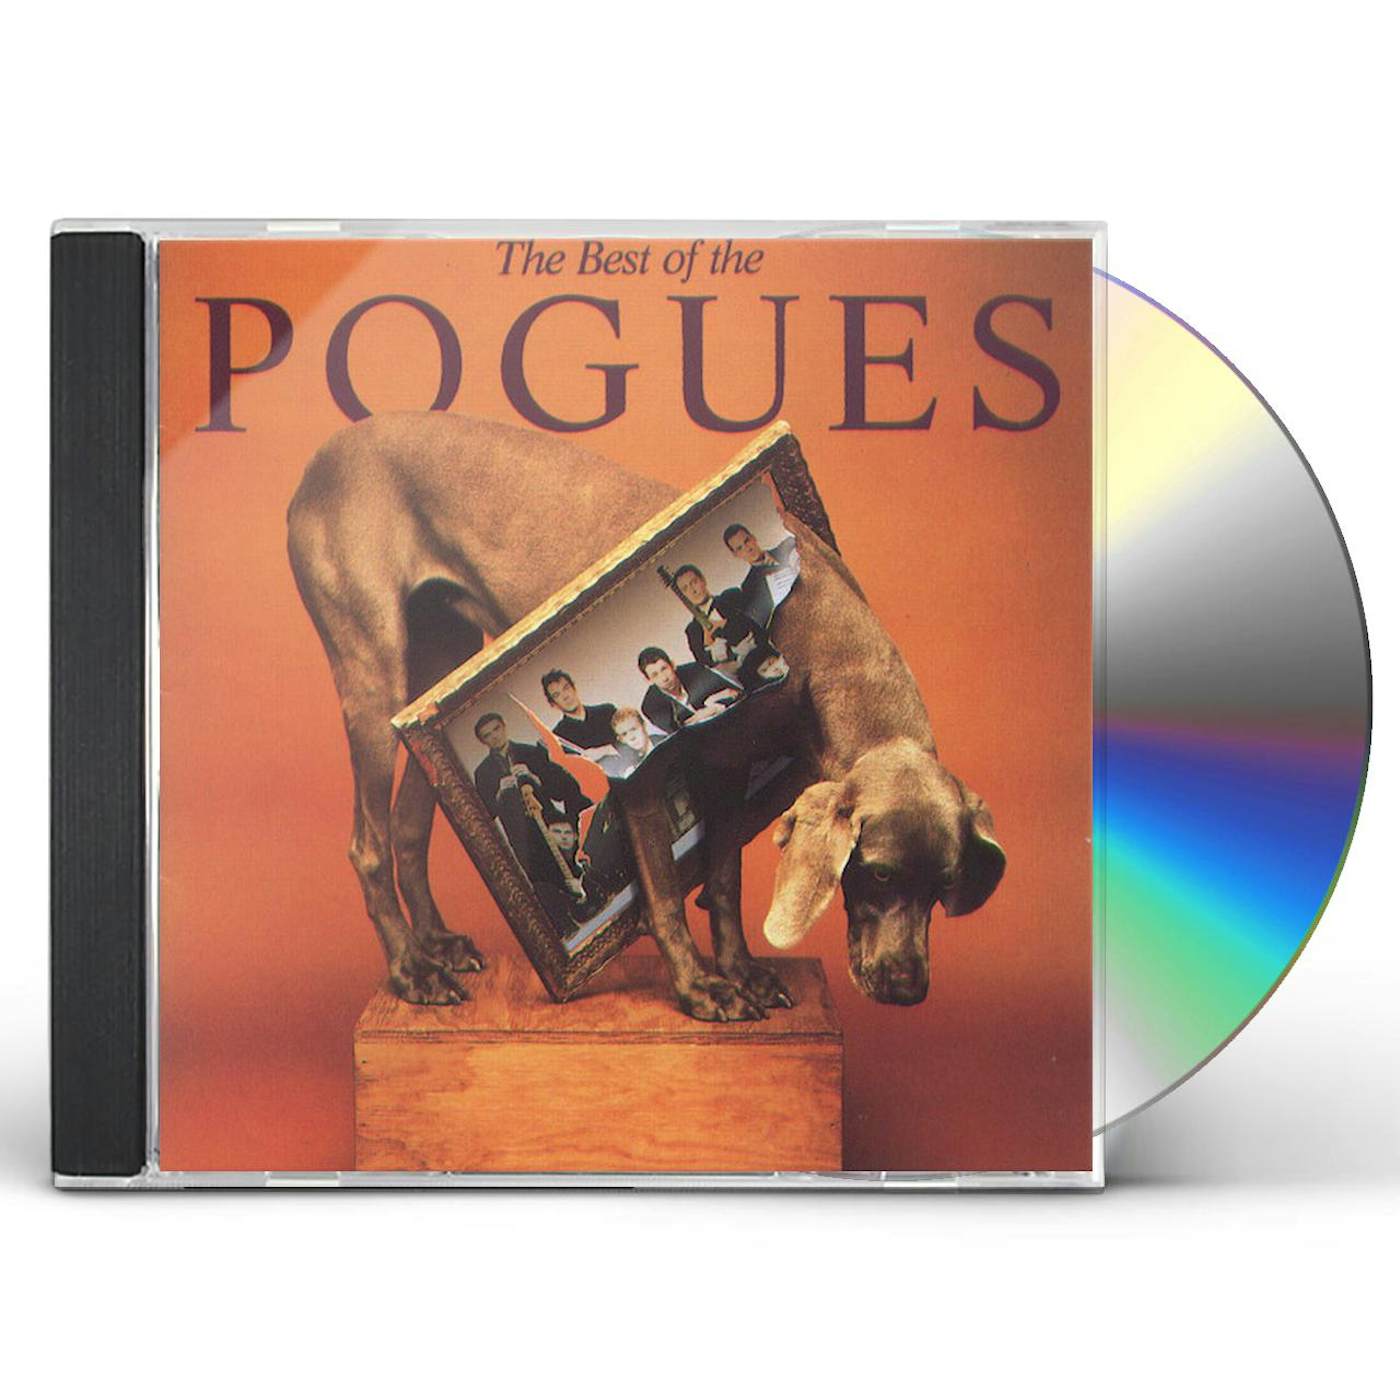 The Pogues - The Bbc Sessions 1984-1986 (cd) : Target